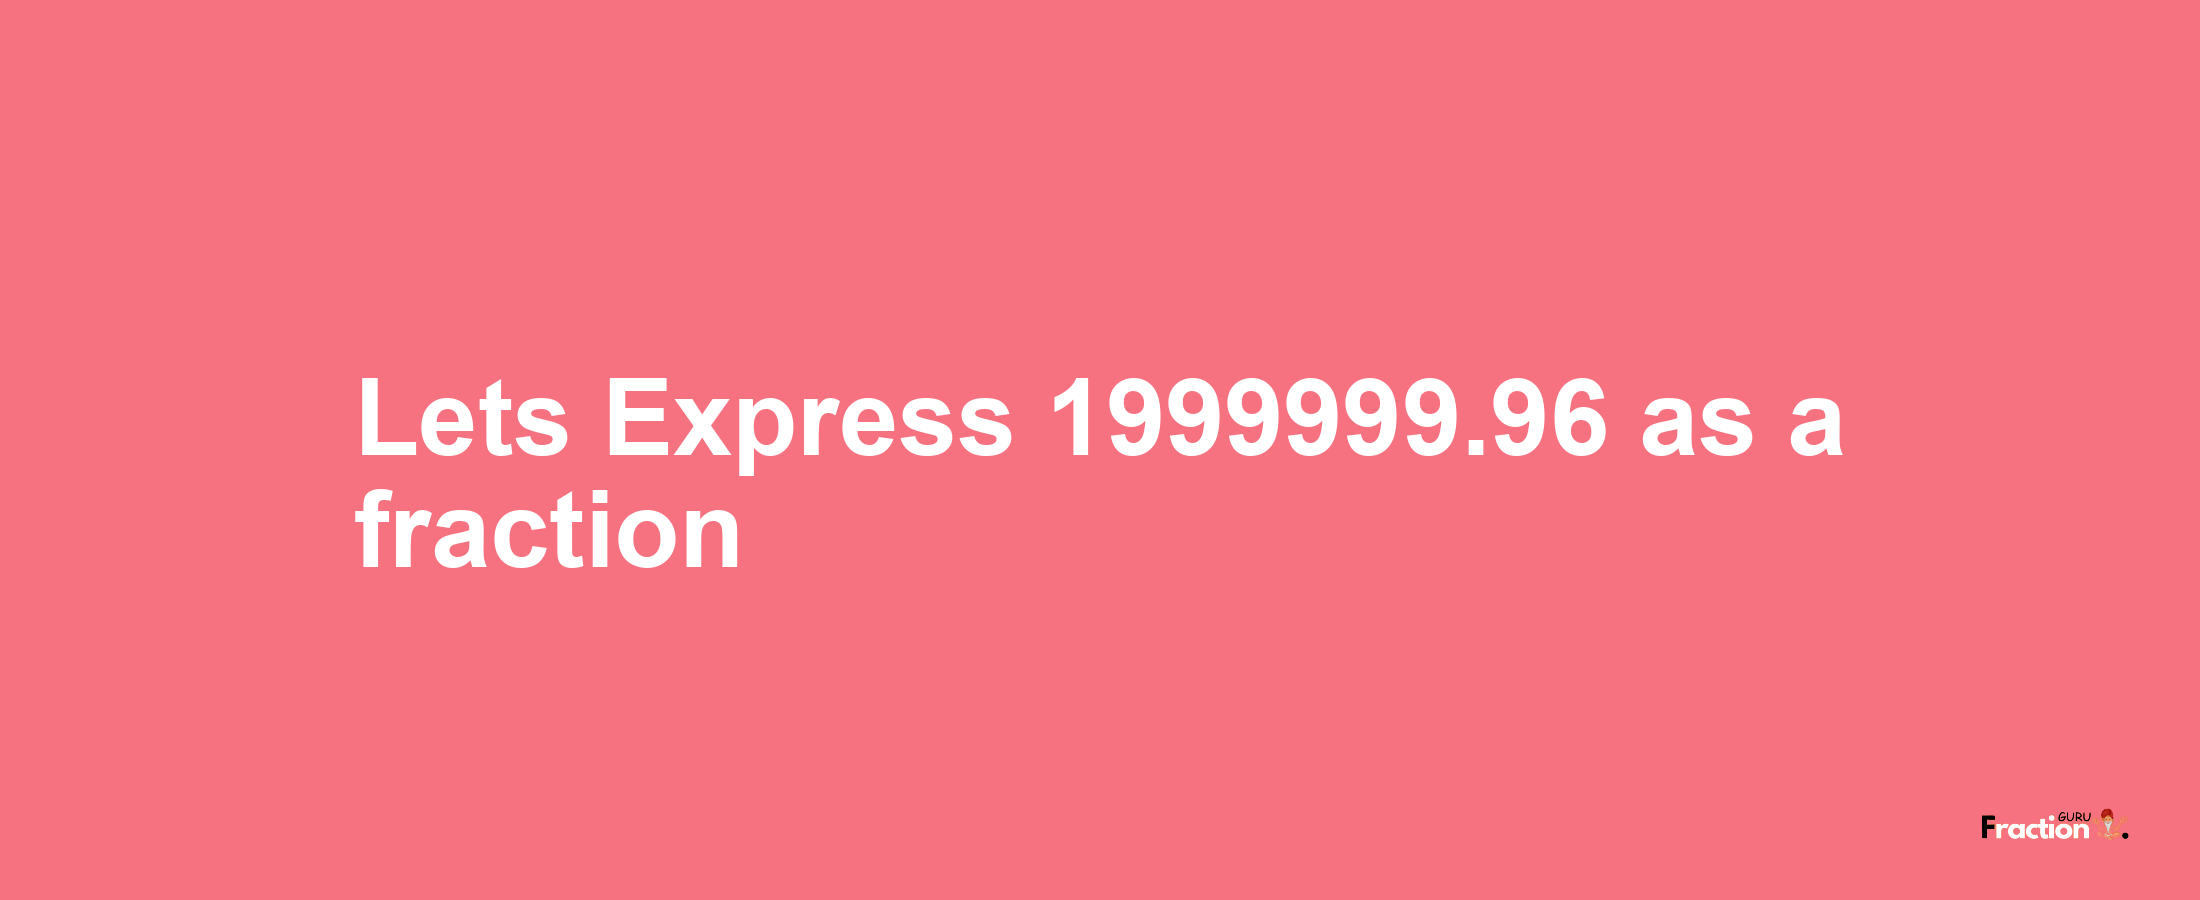 Lets Express 1999999.96 as afraction